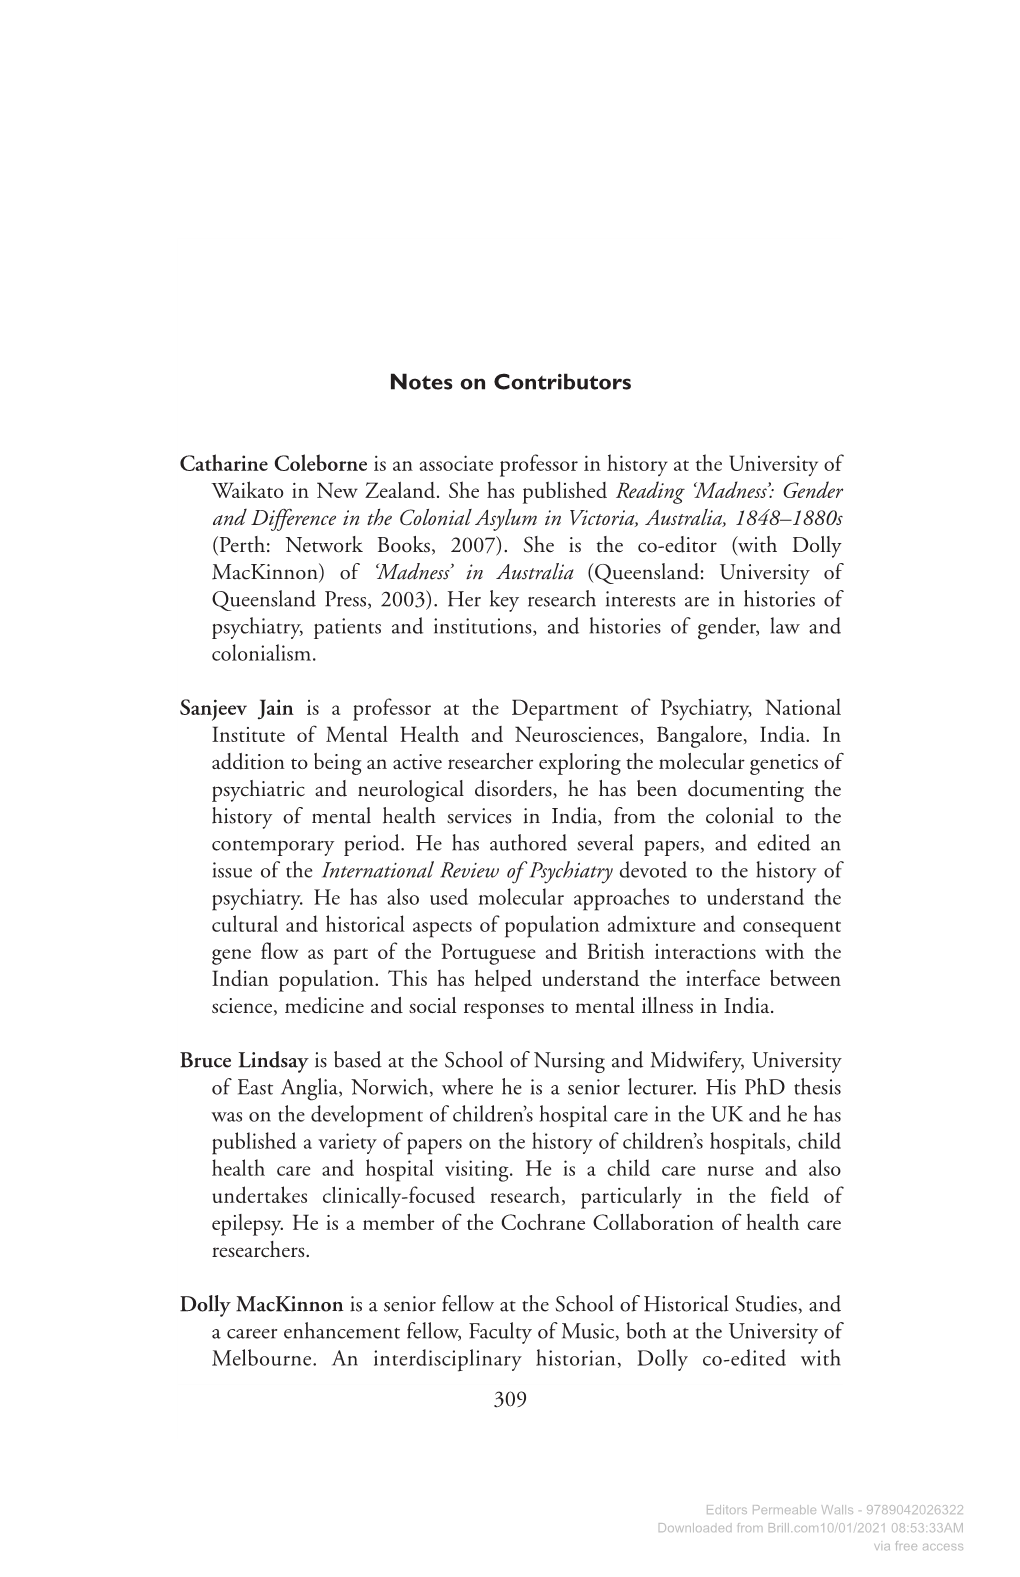 Notes on Contributors Catharine Coleborne Is an Associate